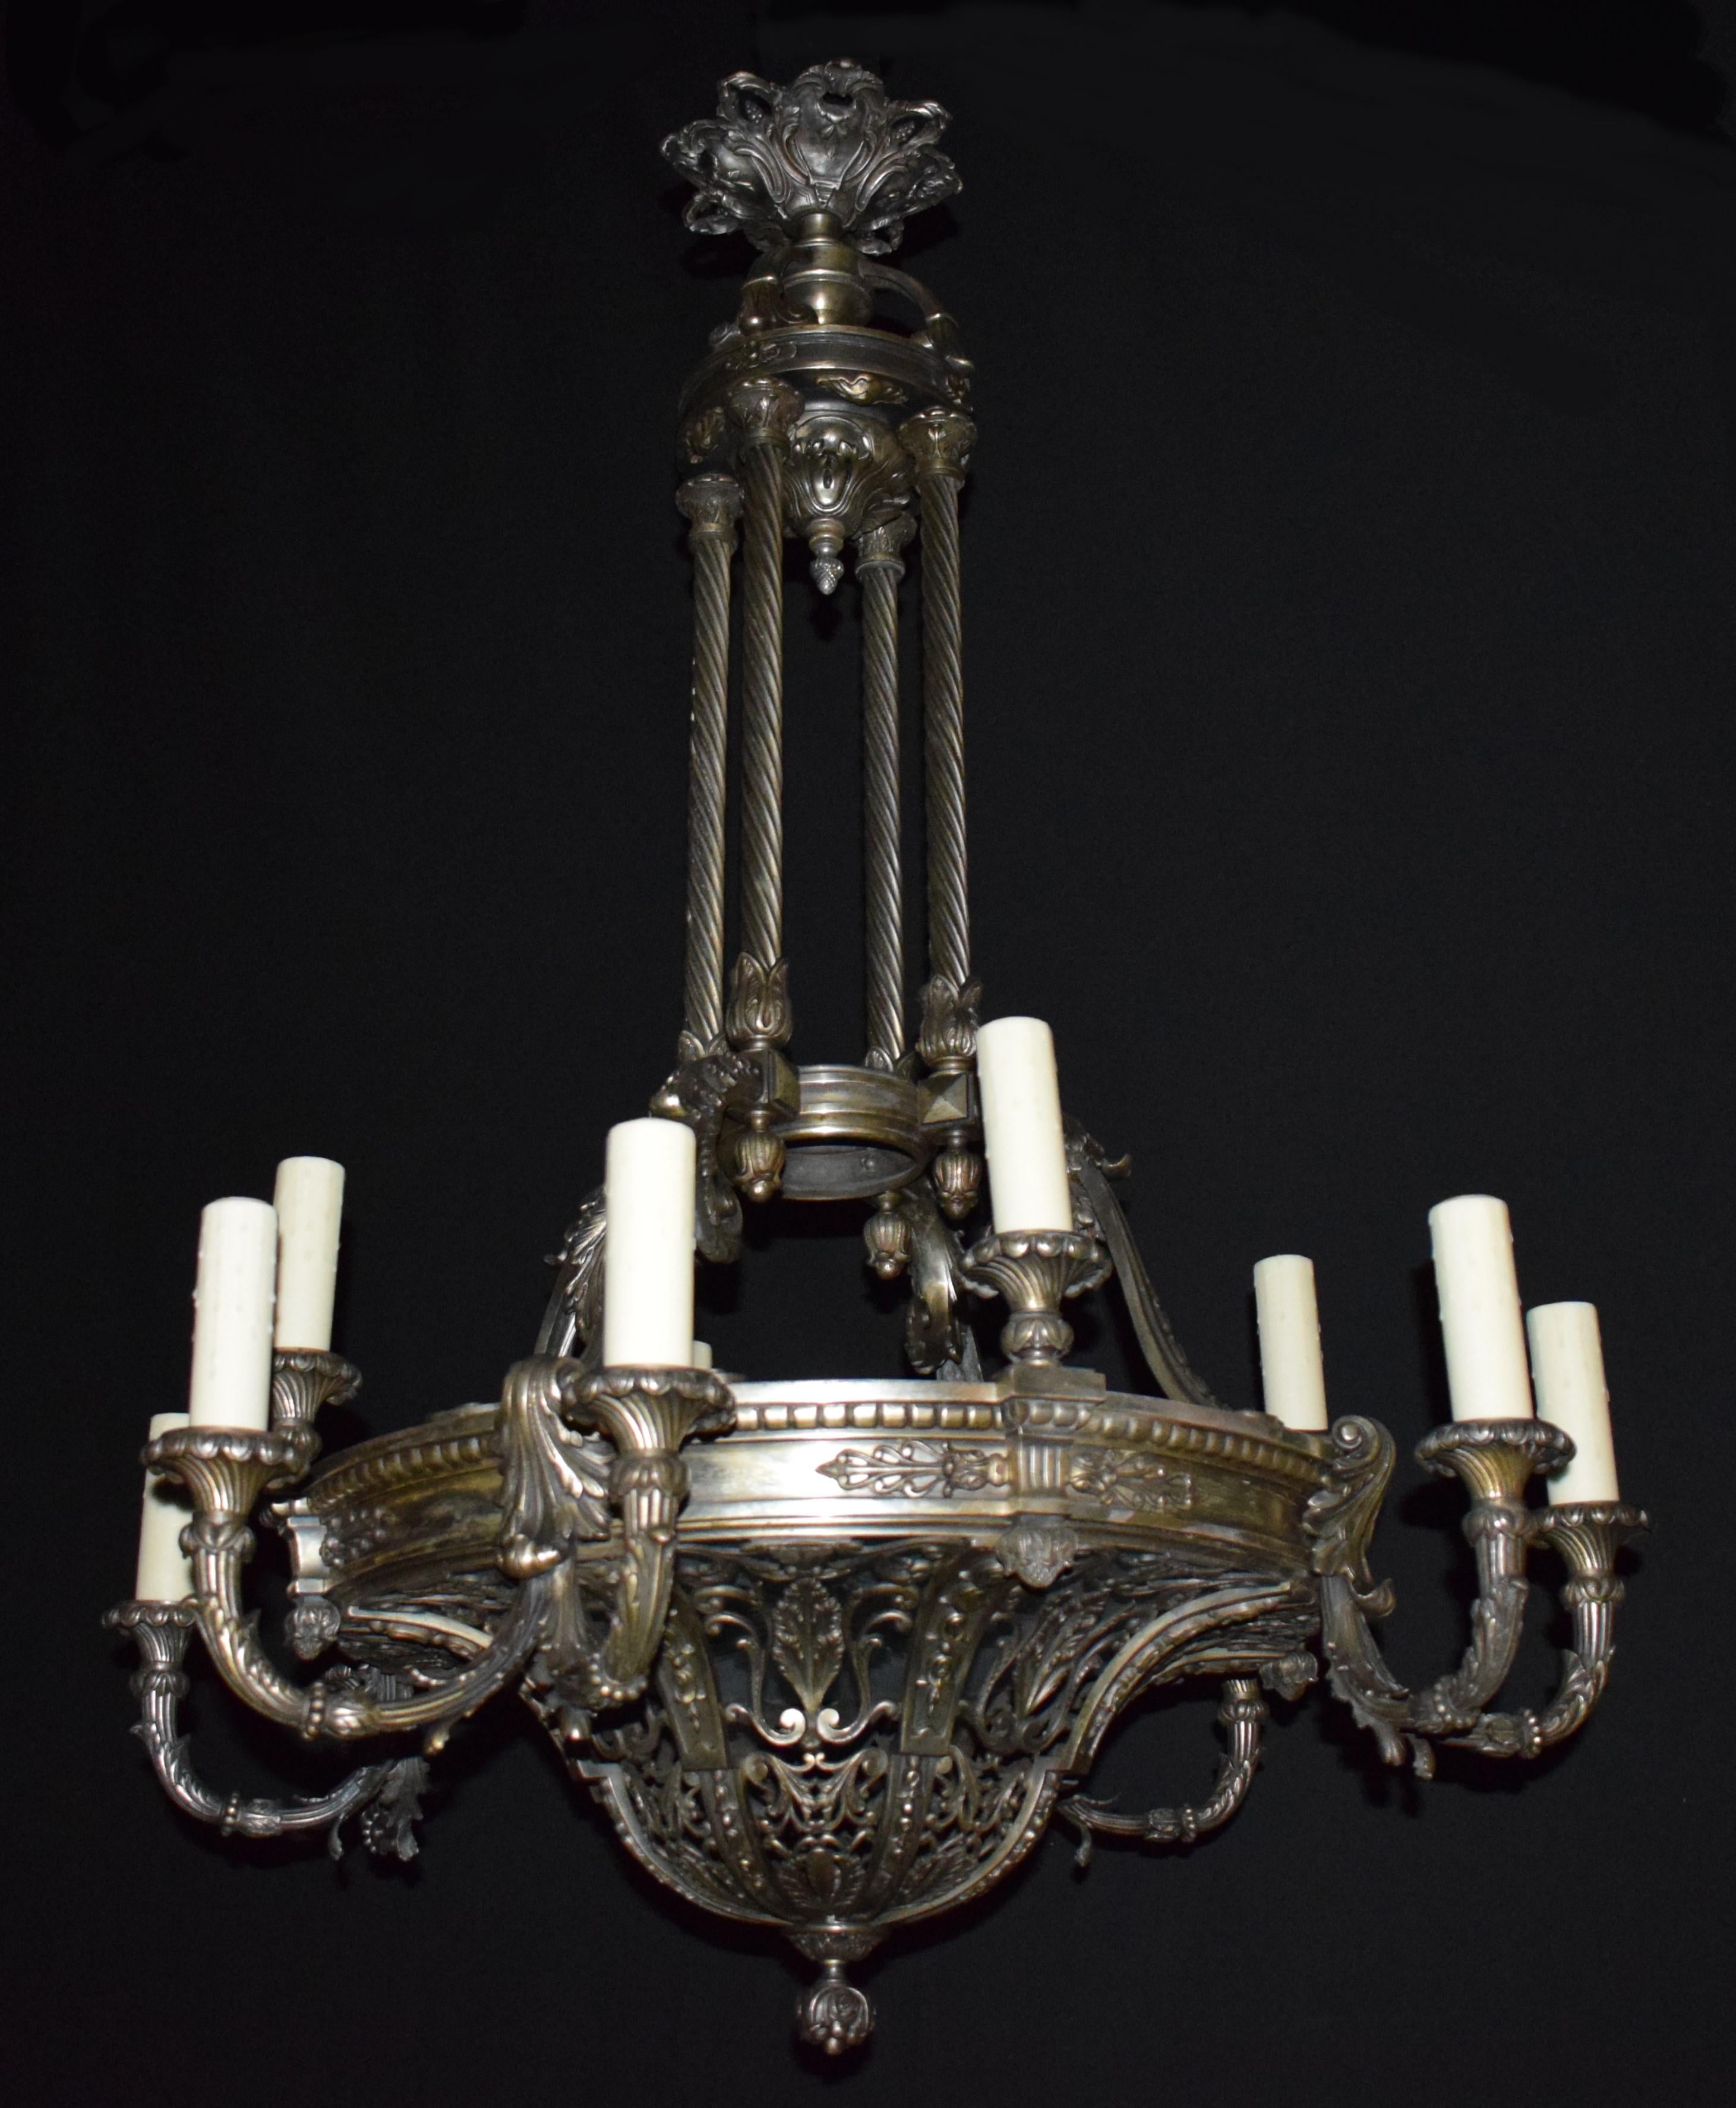 A very fine and striking silver over bronze neoclassical chandelier. The pierced bottom dome of great quality is the main feature of this fixture. The main ring issuing four pairs of reeded arms and four single lights. Supported by four twisted